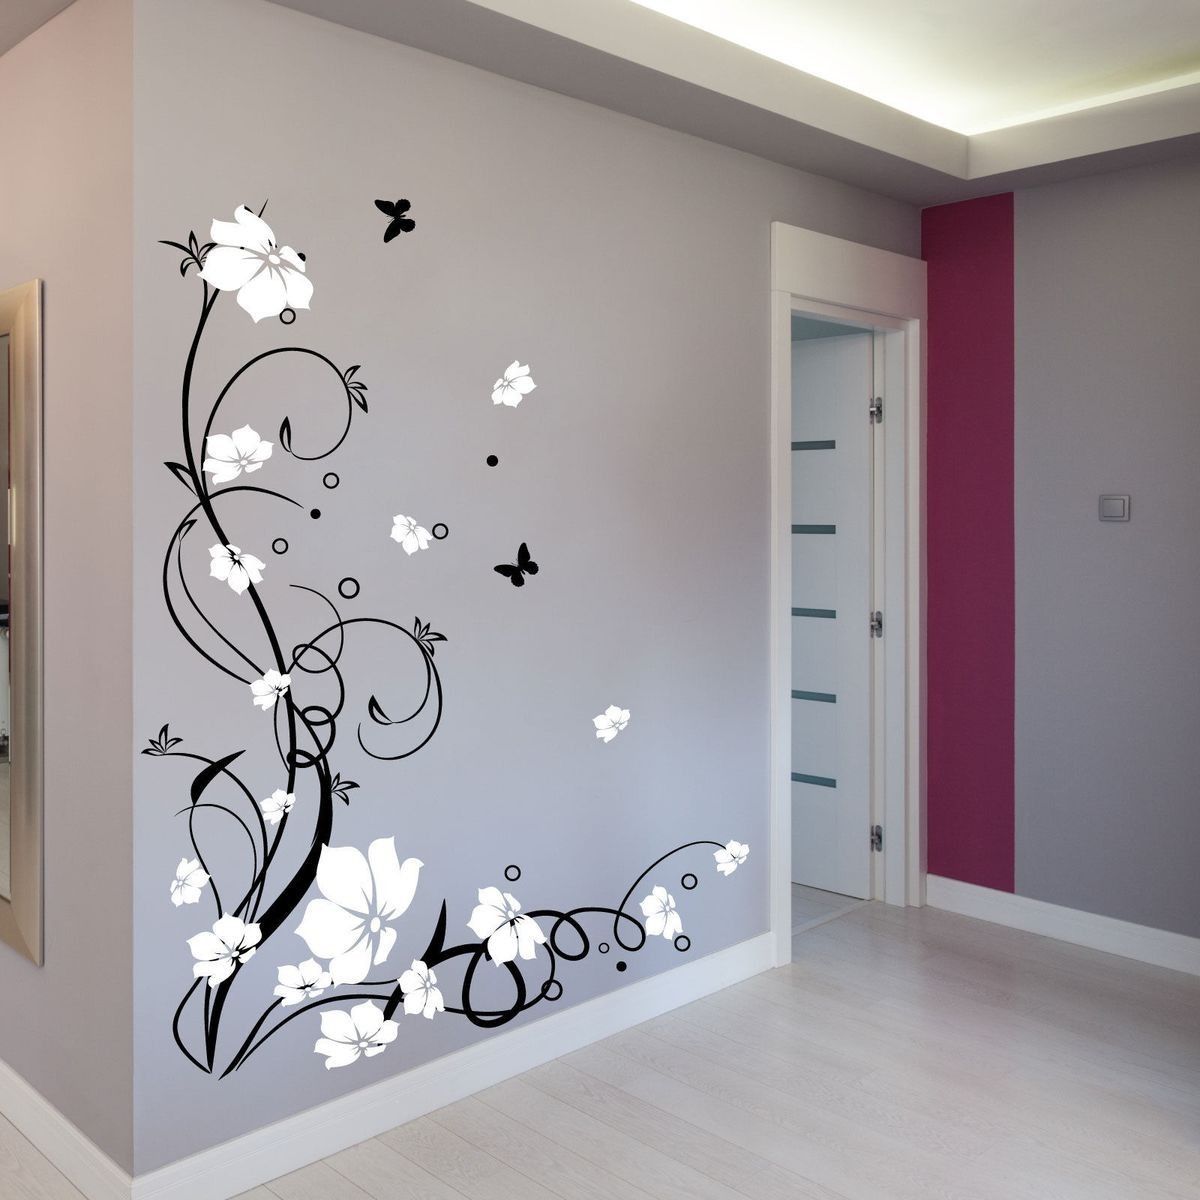 A More Beautiful And Fun Living Room With Wall Stickers